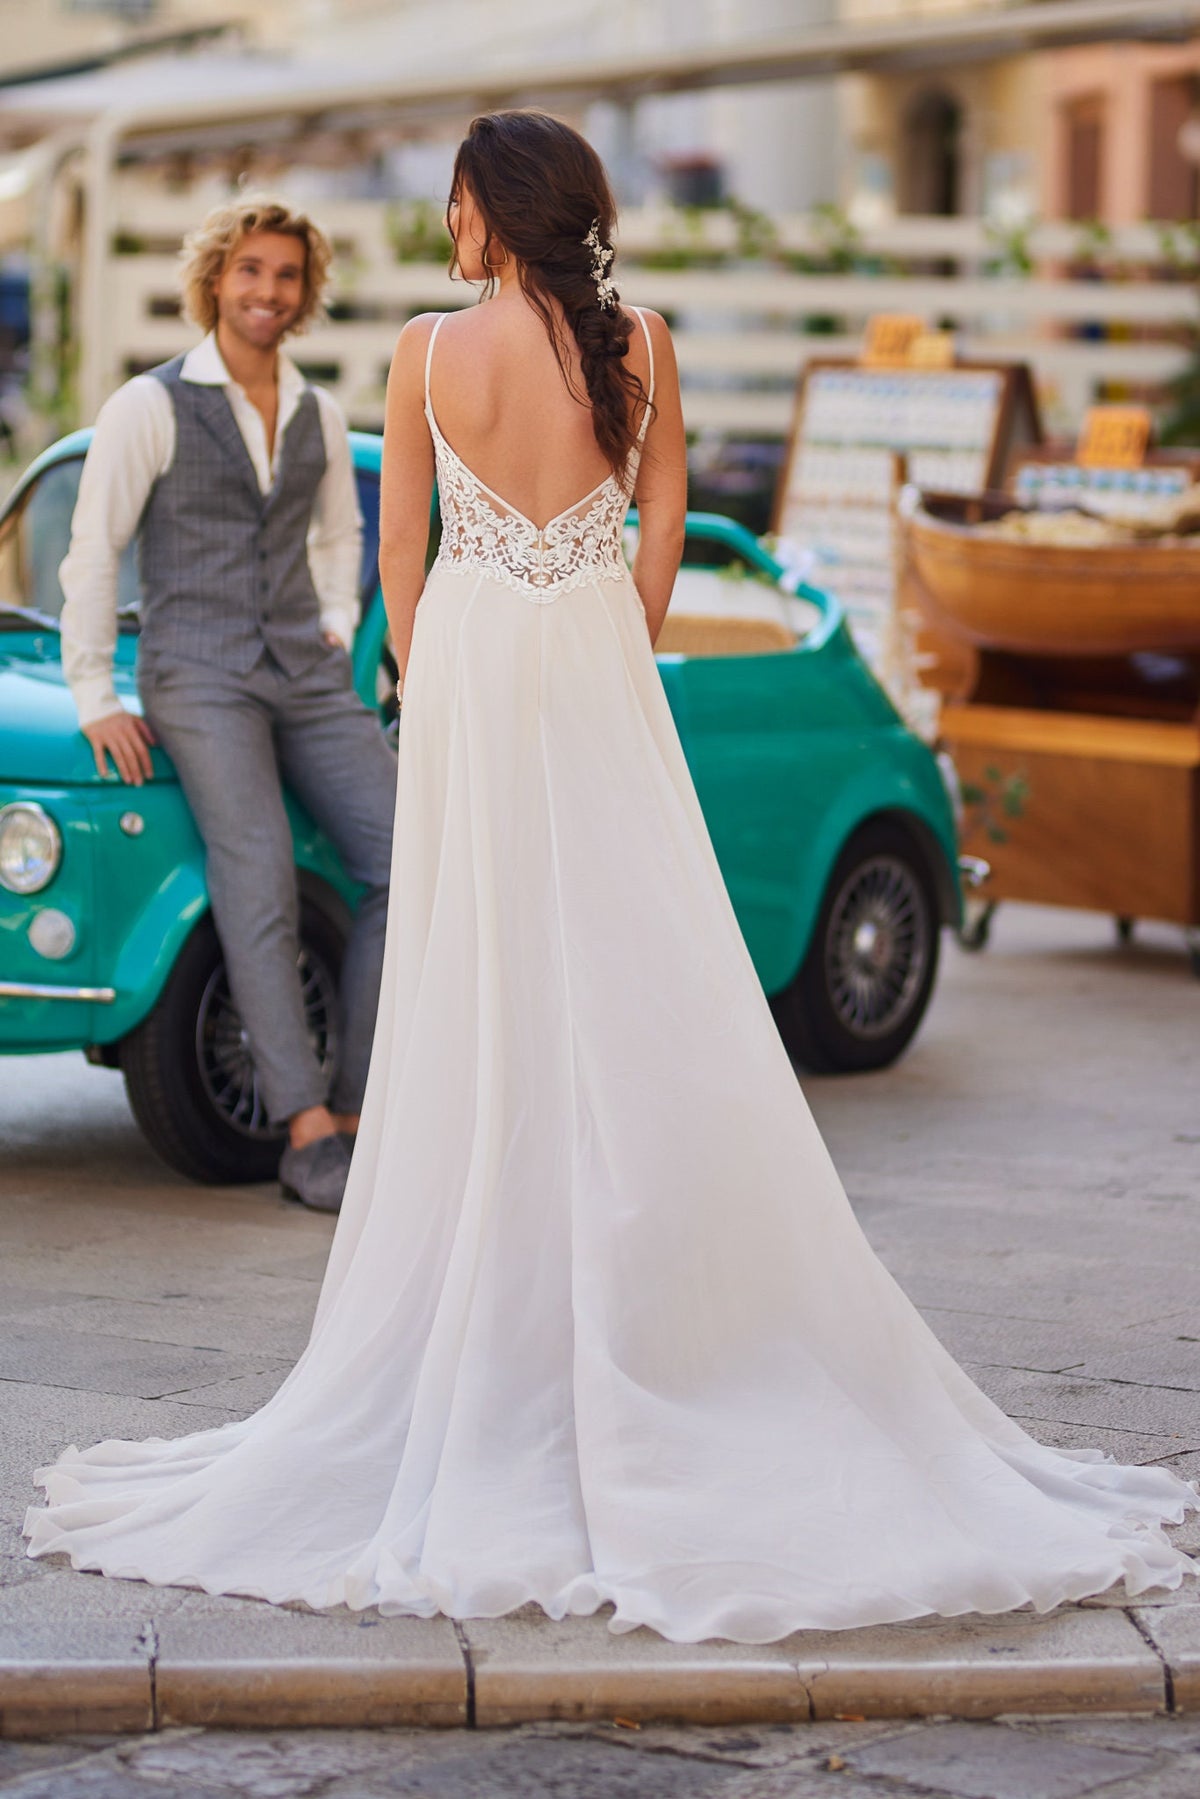 Boho Chic Plunge V-Neck A-Line Wedding Dress with Spaghetti Straps and Lace Bodice Bridal Gown